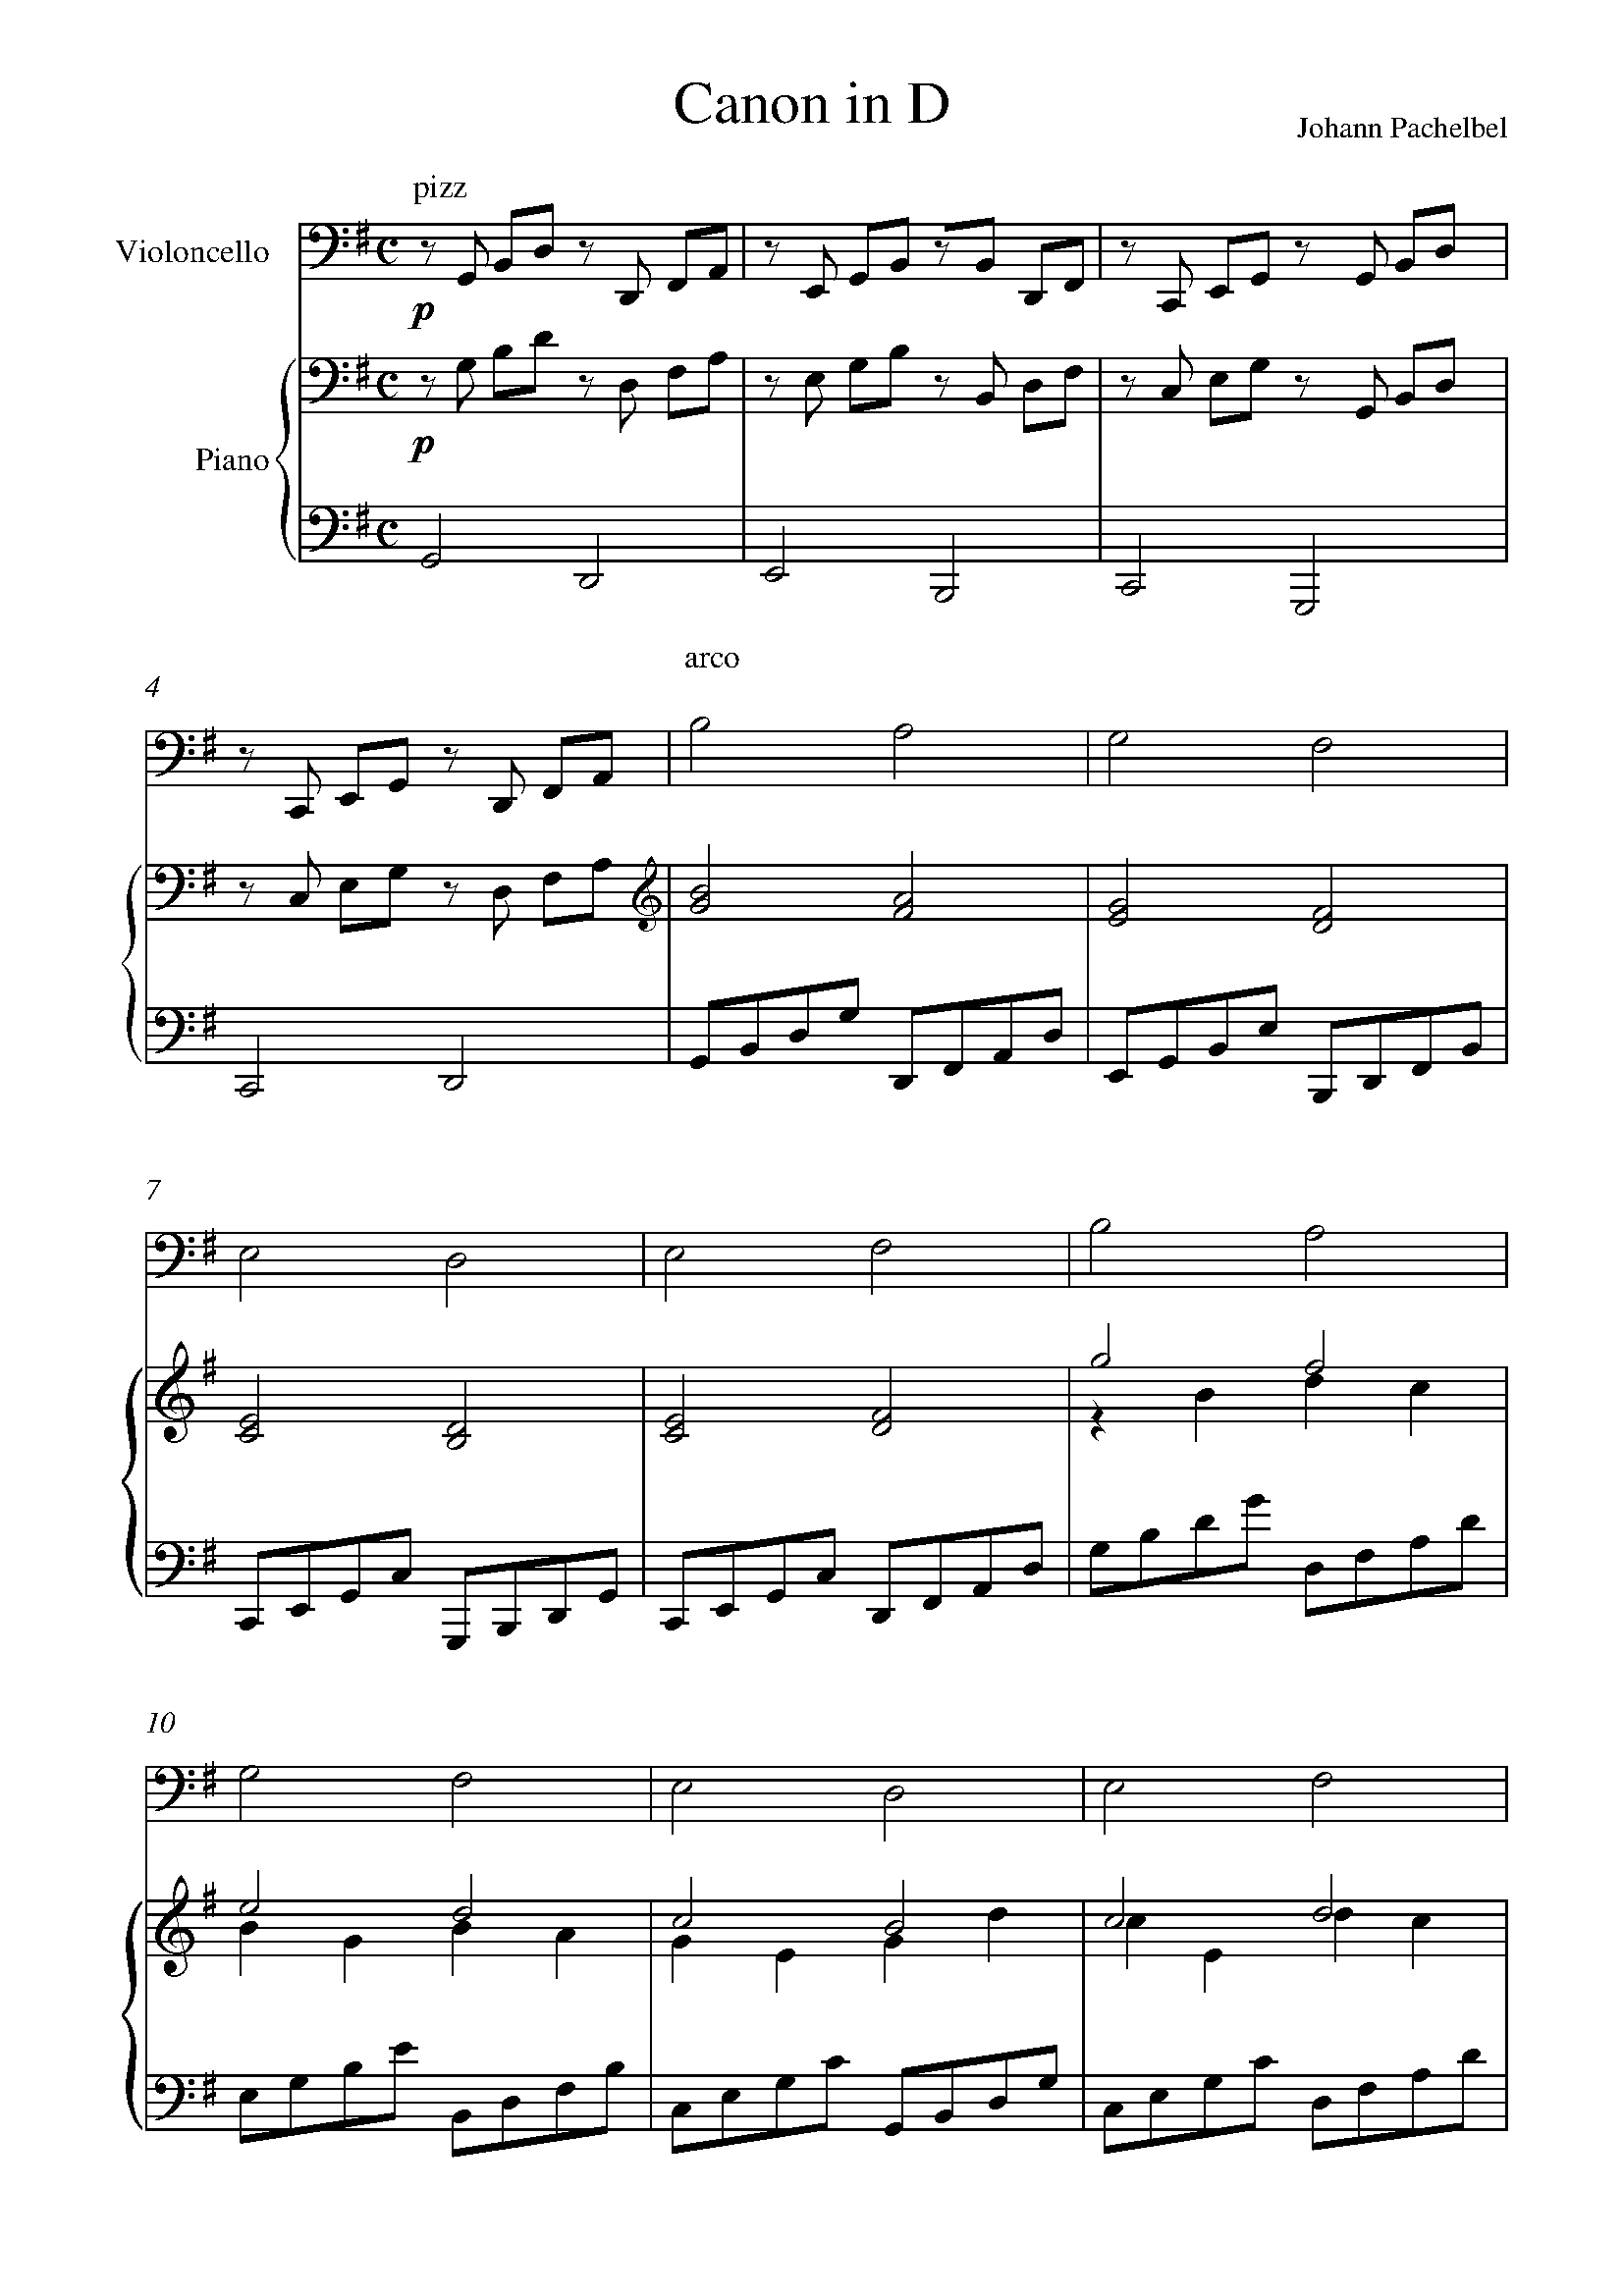 Pachelbel - Canon In D Sheet Music For Cello - 8Notes - Canon In D Piano Sheet Music Free Printable